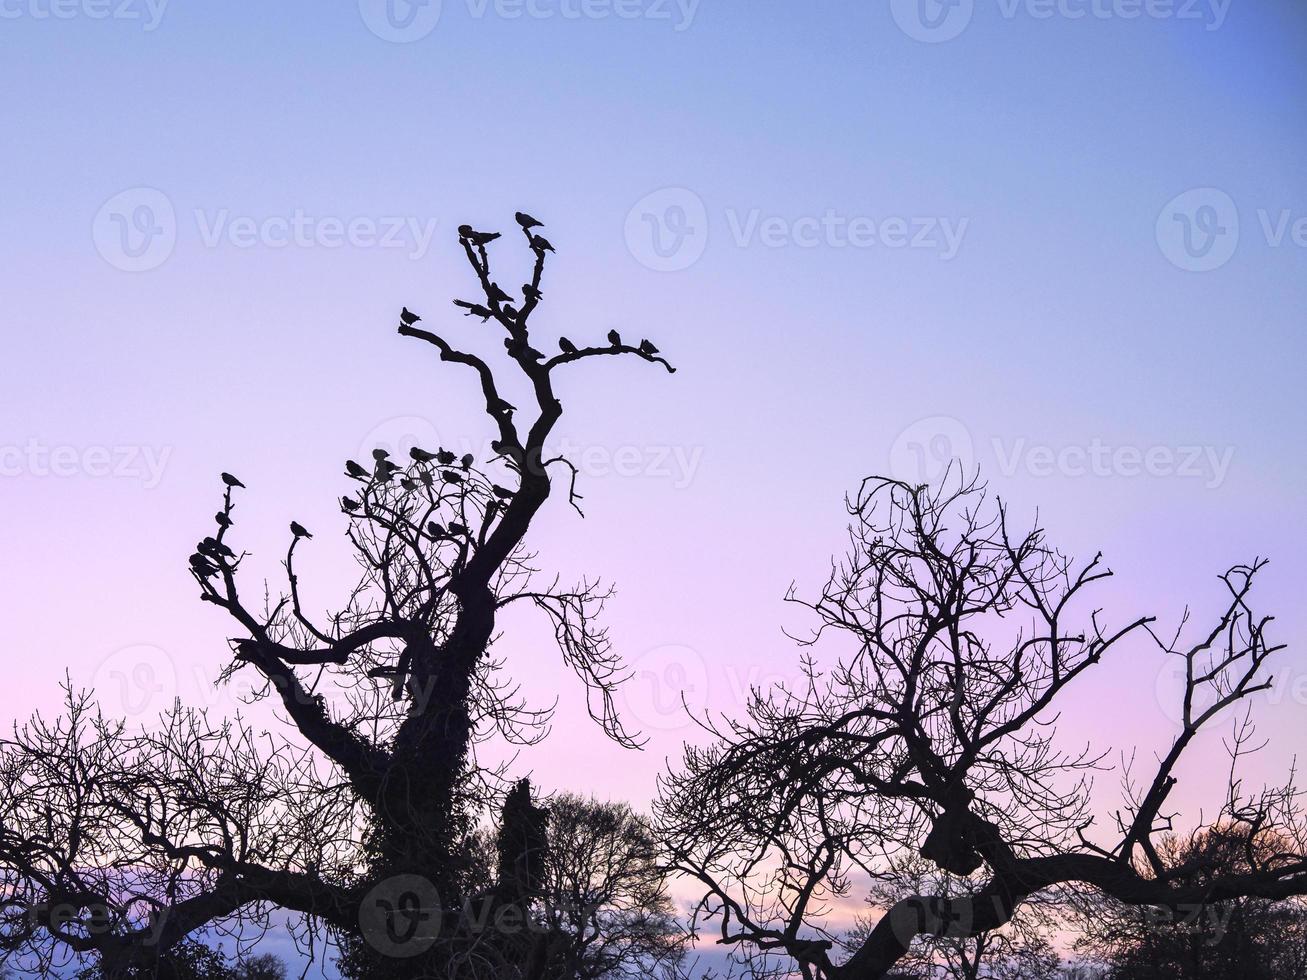 Pigeons resting on bare tree branches in silhouette against a pink sky photo